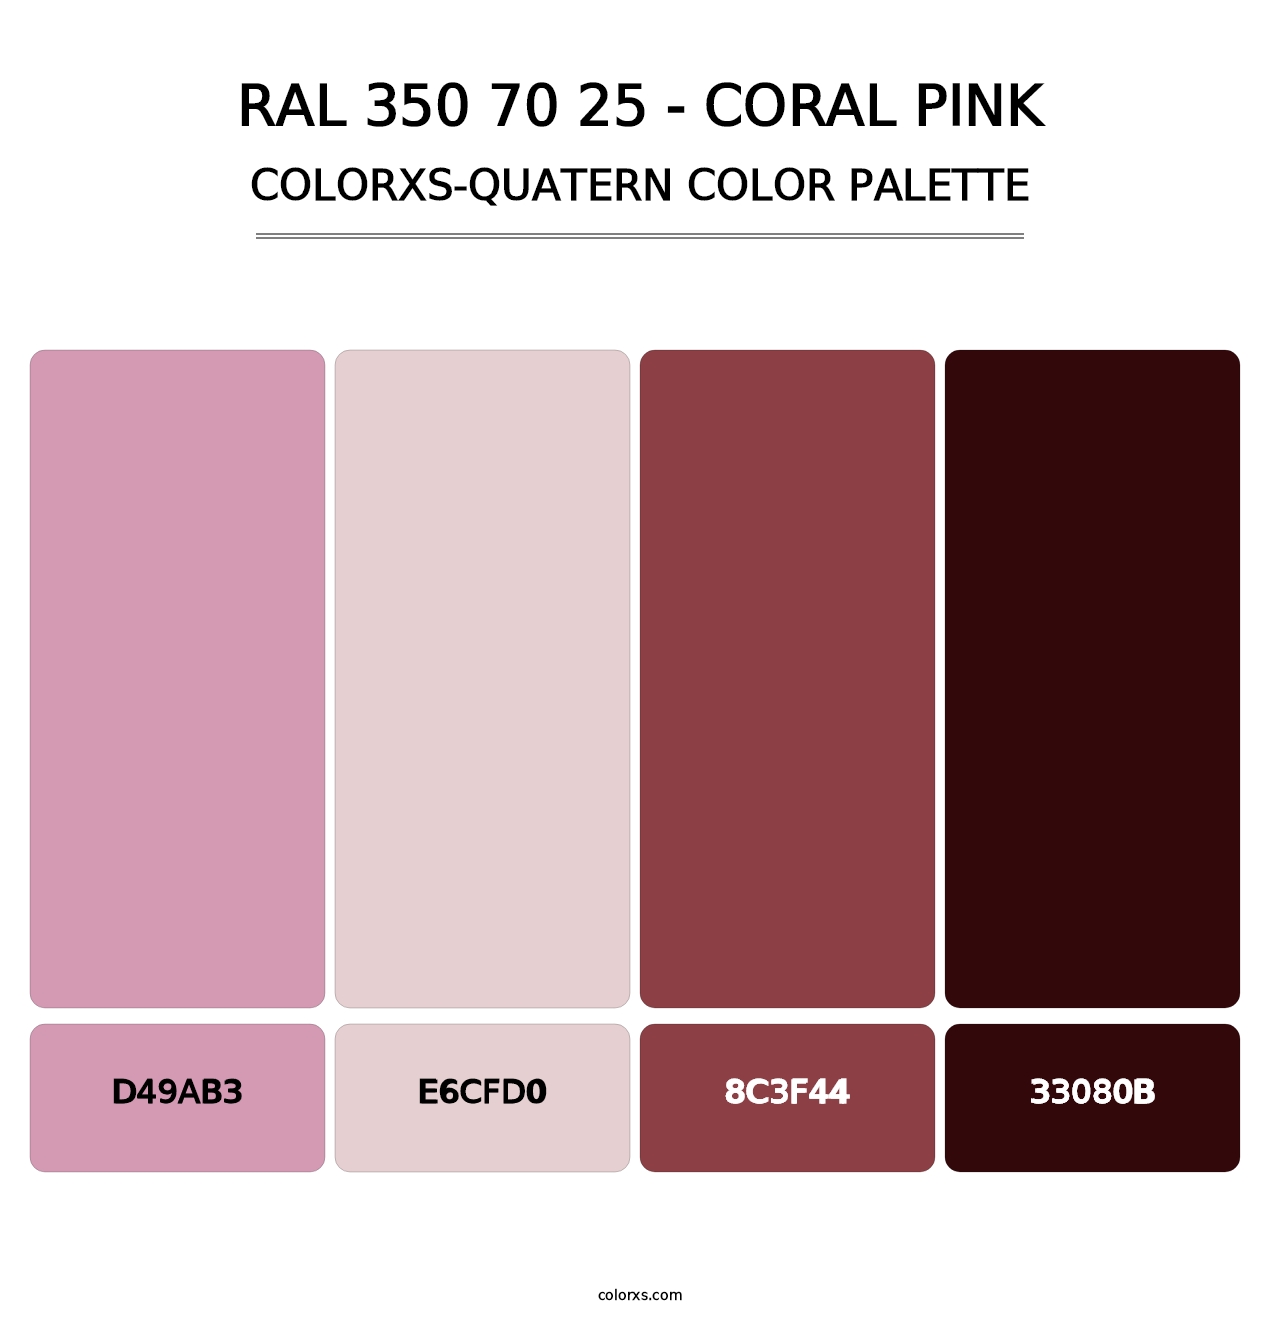 RAL 350 70 25 - Coral Pink - Colorxs Quatern Palette